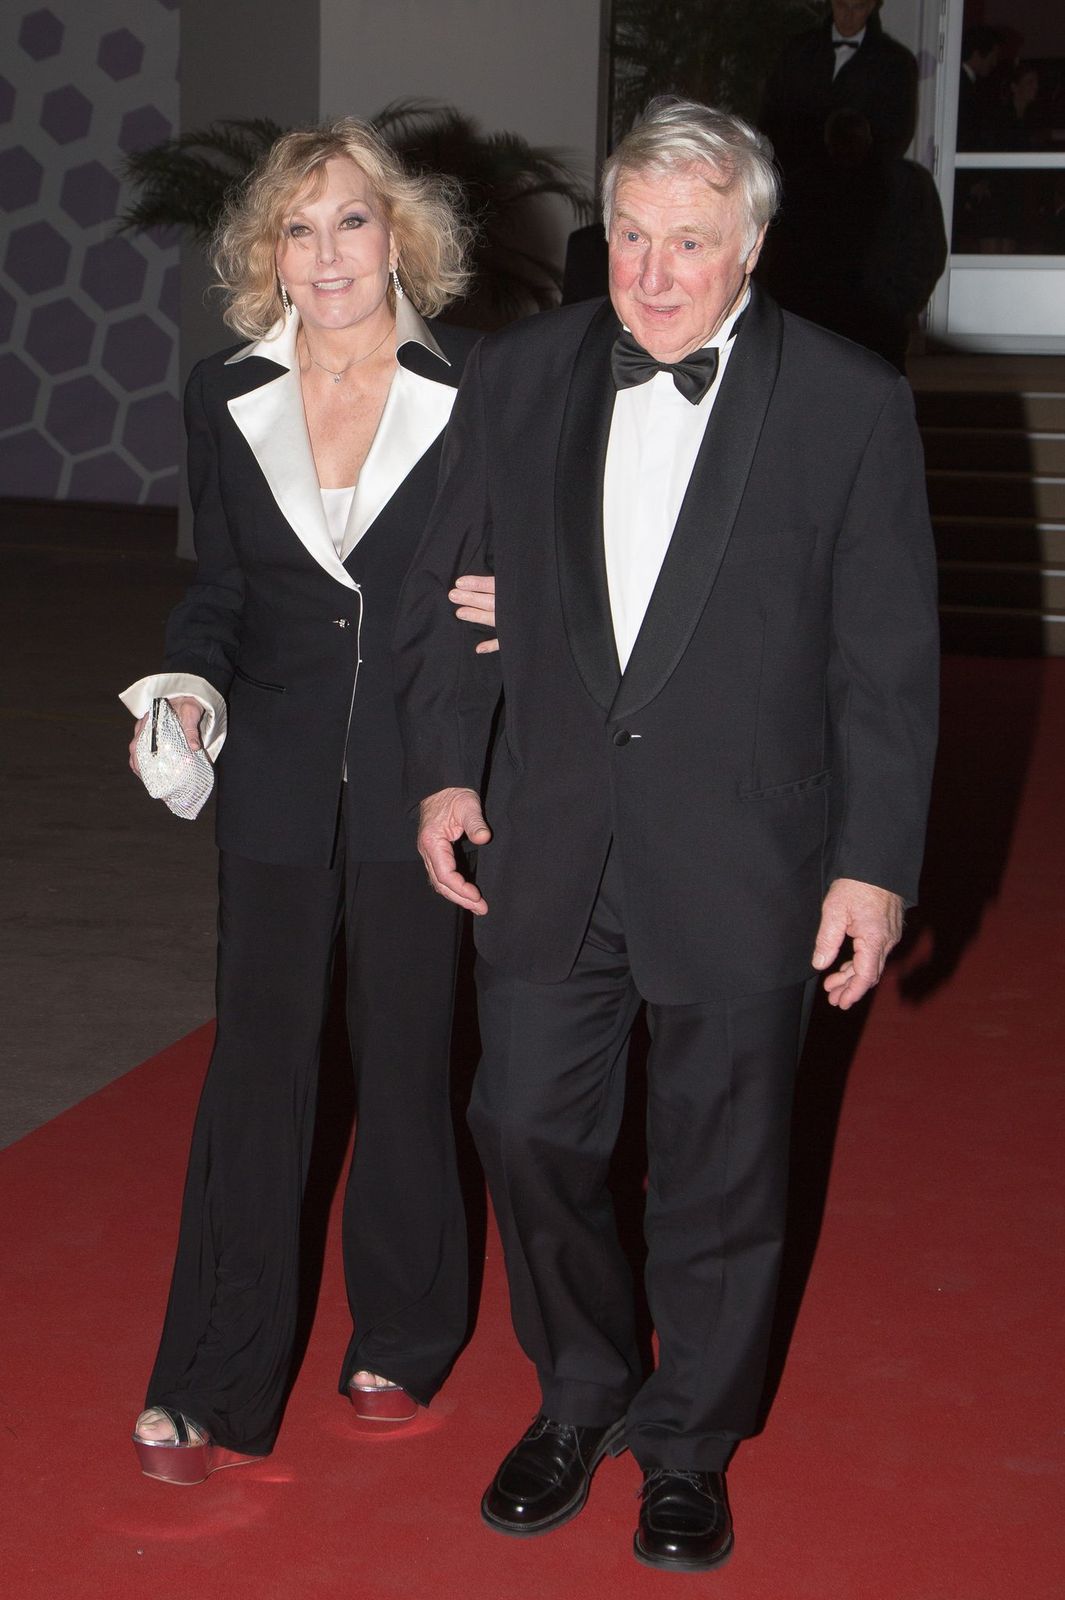 Kim Novak and Robert Malloy leaving the "Agora" dinner during the 66th Annual Cannes Film Festival on May 25, 2013, in Cannes, France | Photo: Marc Piasecki/FilmMagic/Getty Images